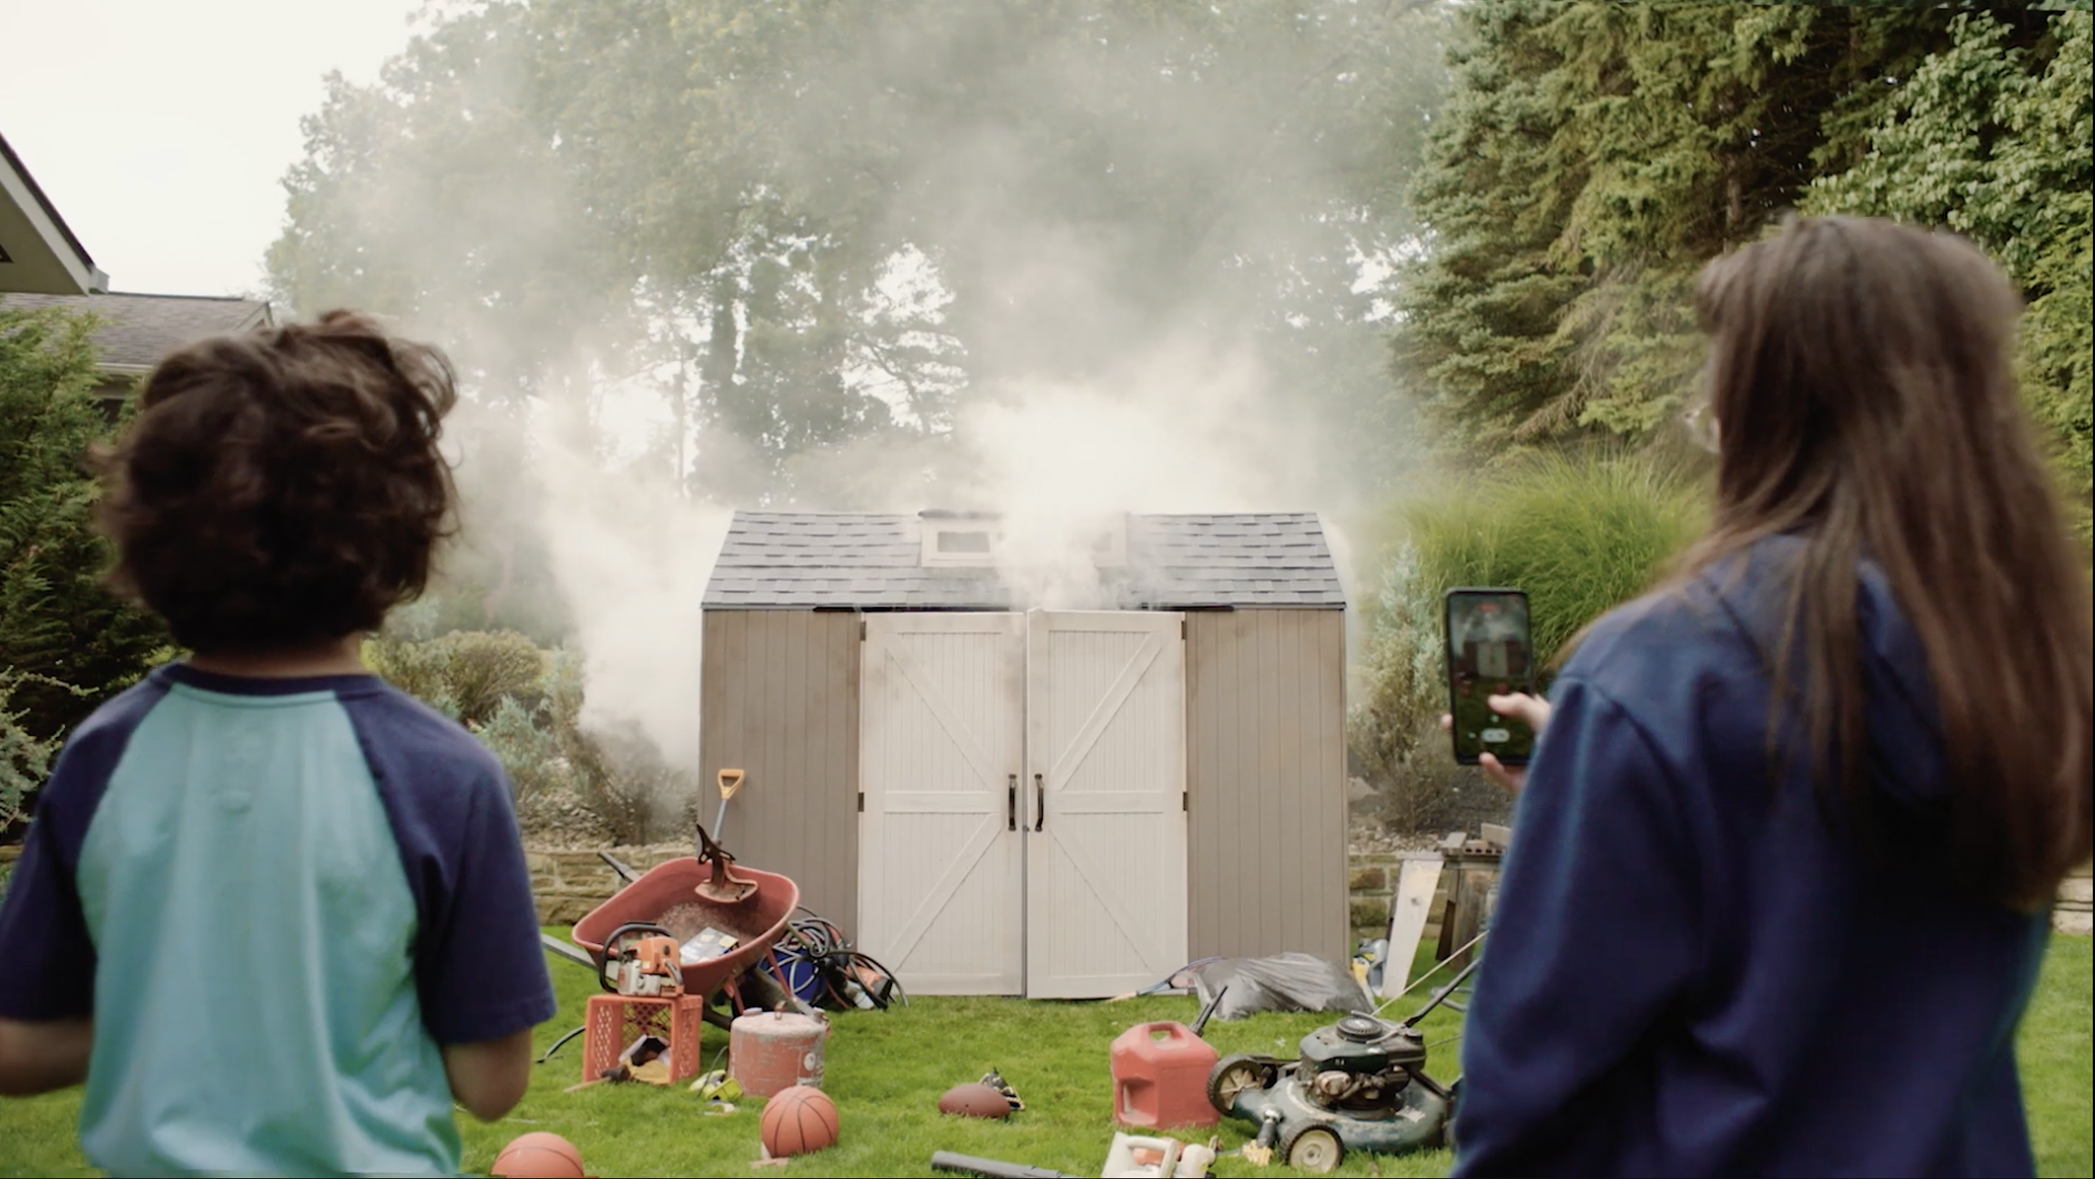 Two kids looking at a shed with smoke coming out of it.